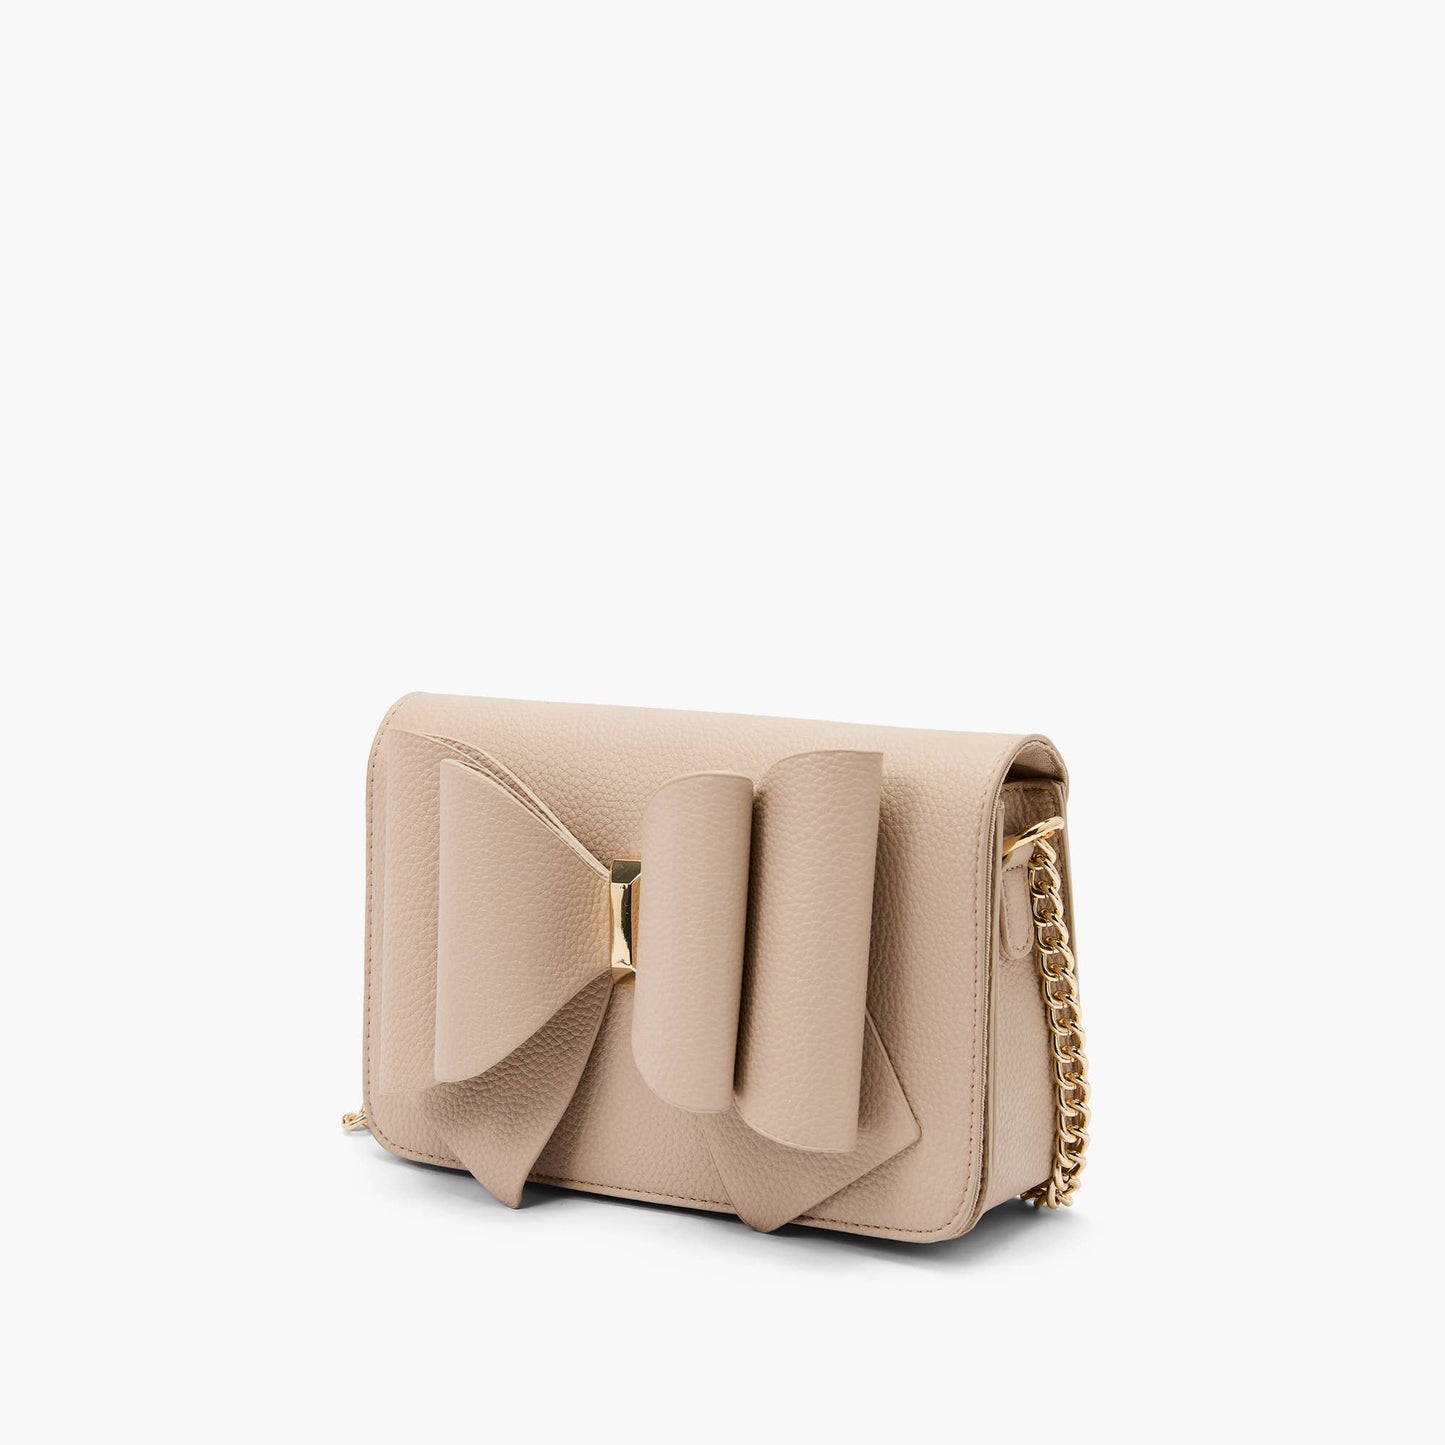 Jane Overflap Bow Crossbody: Coral